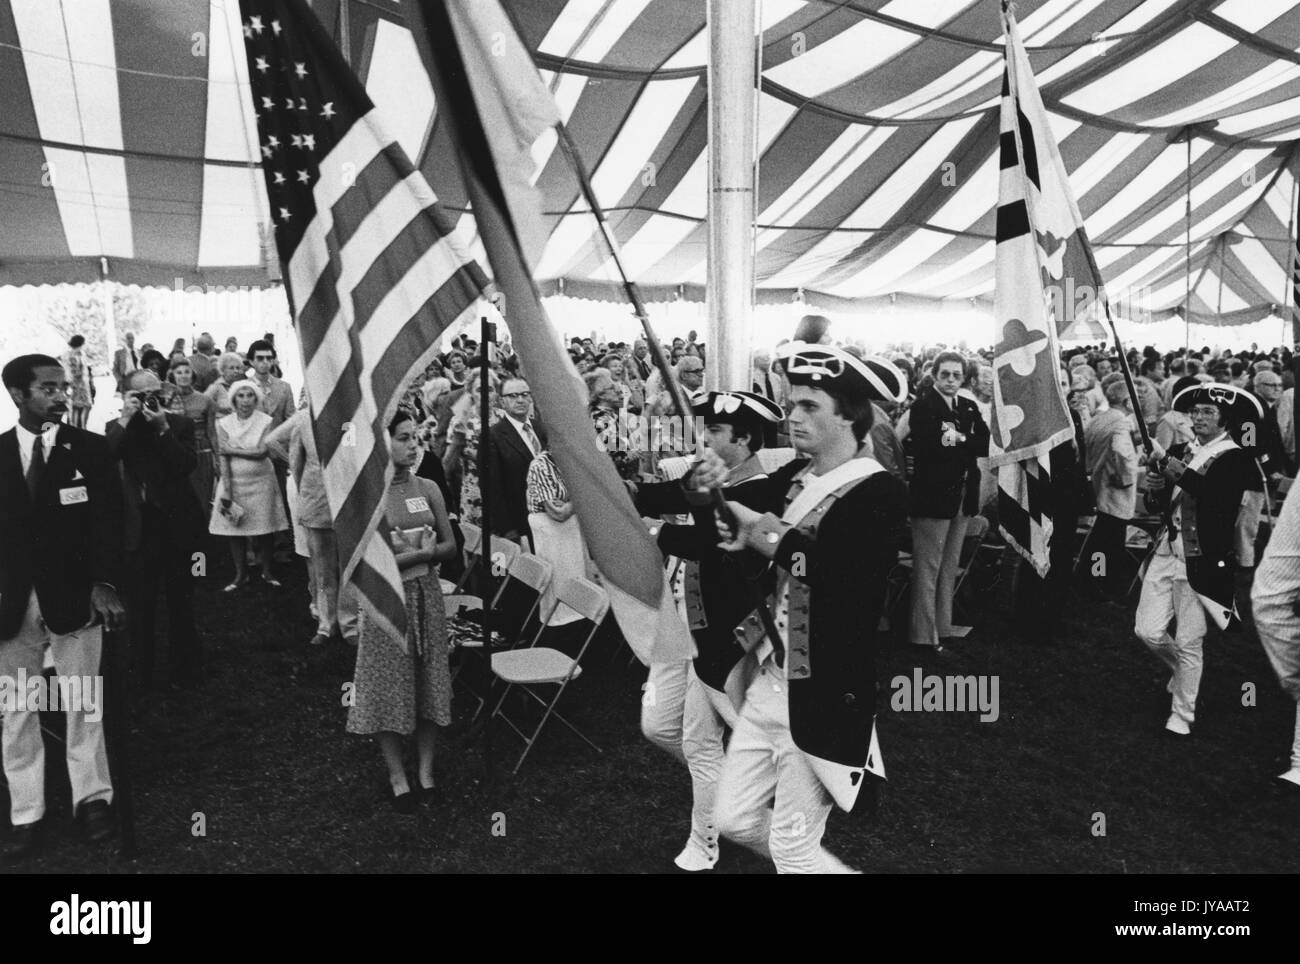 Flag bearers and the audience under a tent at the opening ceremony of the Bicentennial Convocation held at The Johns Hopkins University Homewood Campus, July 16, 1976. Stock Photo